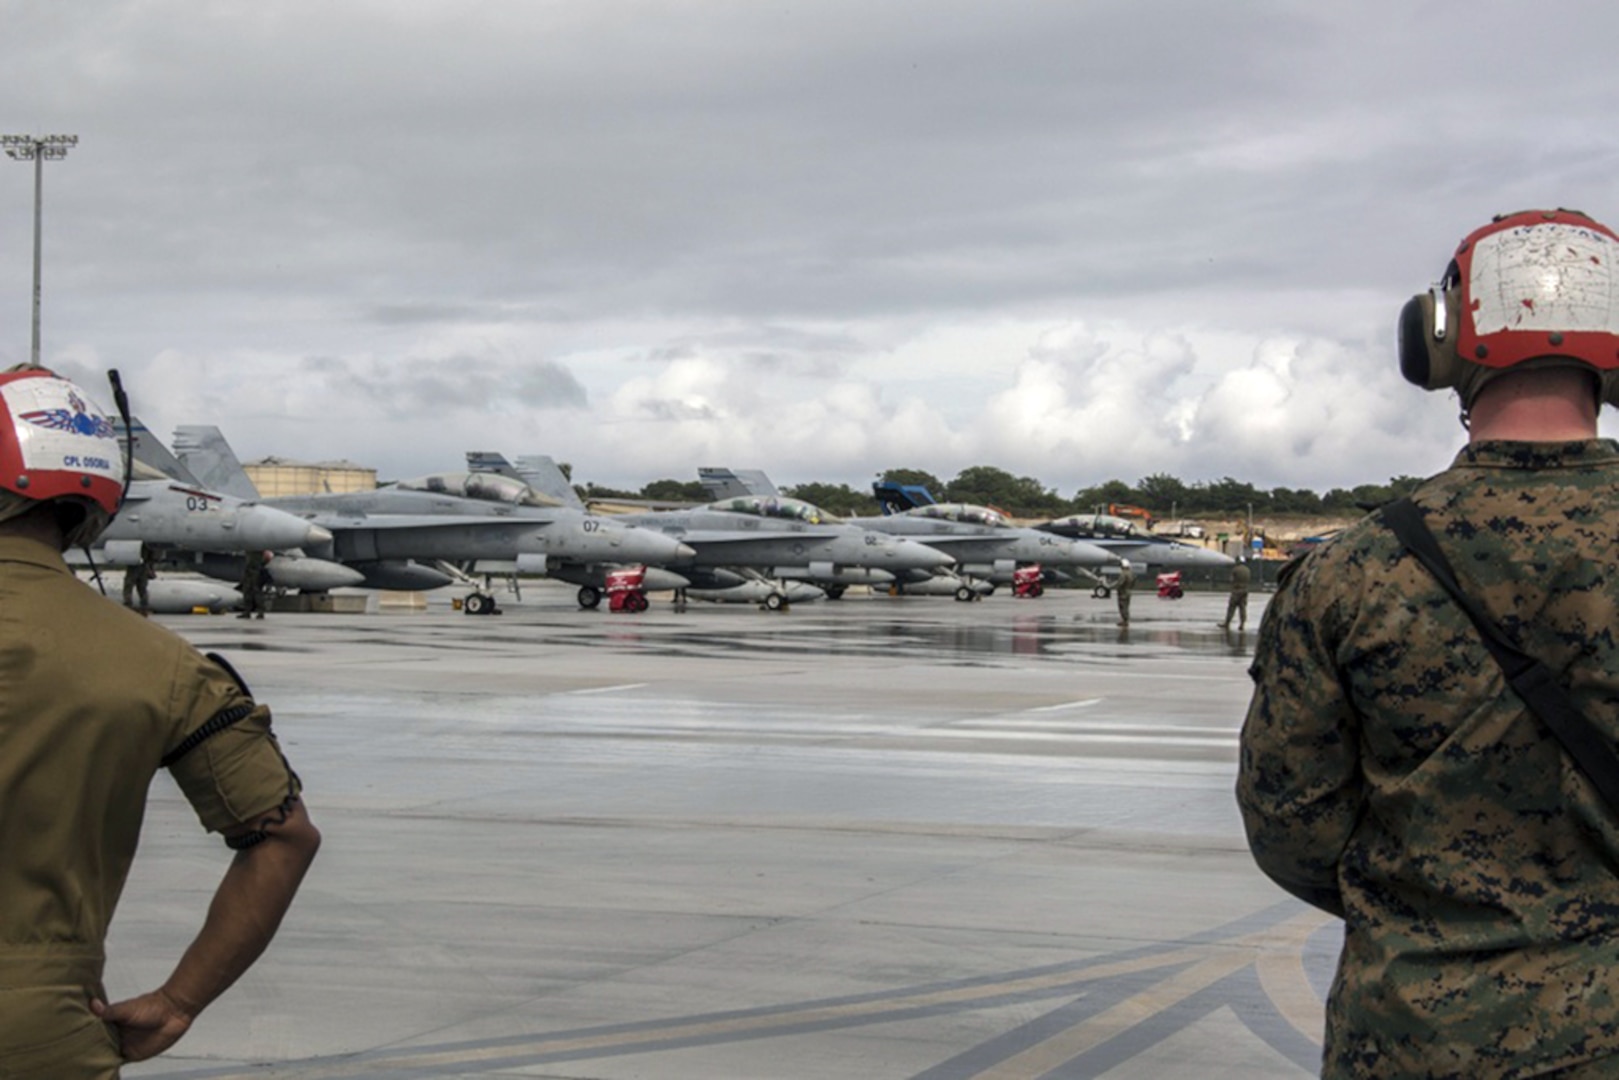 U.S. Marines with Marine All Weather Fighter Attack Squadron (VMFA) 225 wait to direct F/A-18D Hornets during exercise Cope North at Andersen Air Force Base, Feb. 3, 2017.  Marines trained with the Royal Australian Air Force and Japan Air Self-Defense Force supporting theater security, focusing on dissimilar air combat training and large force employment. 